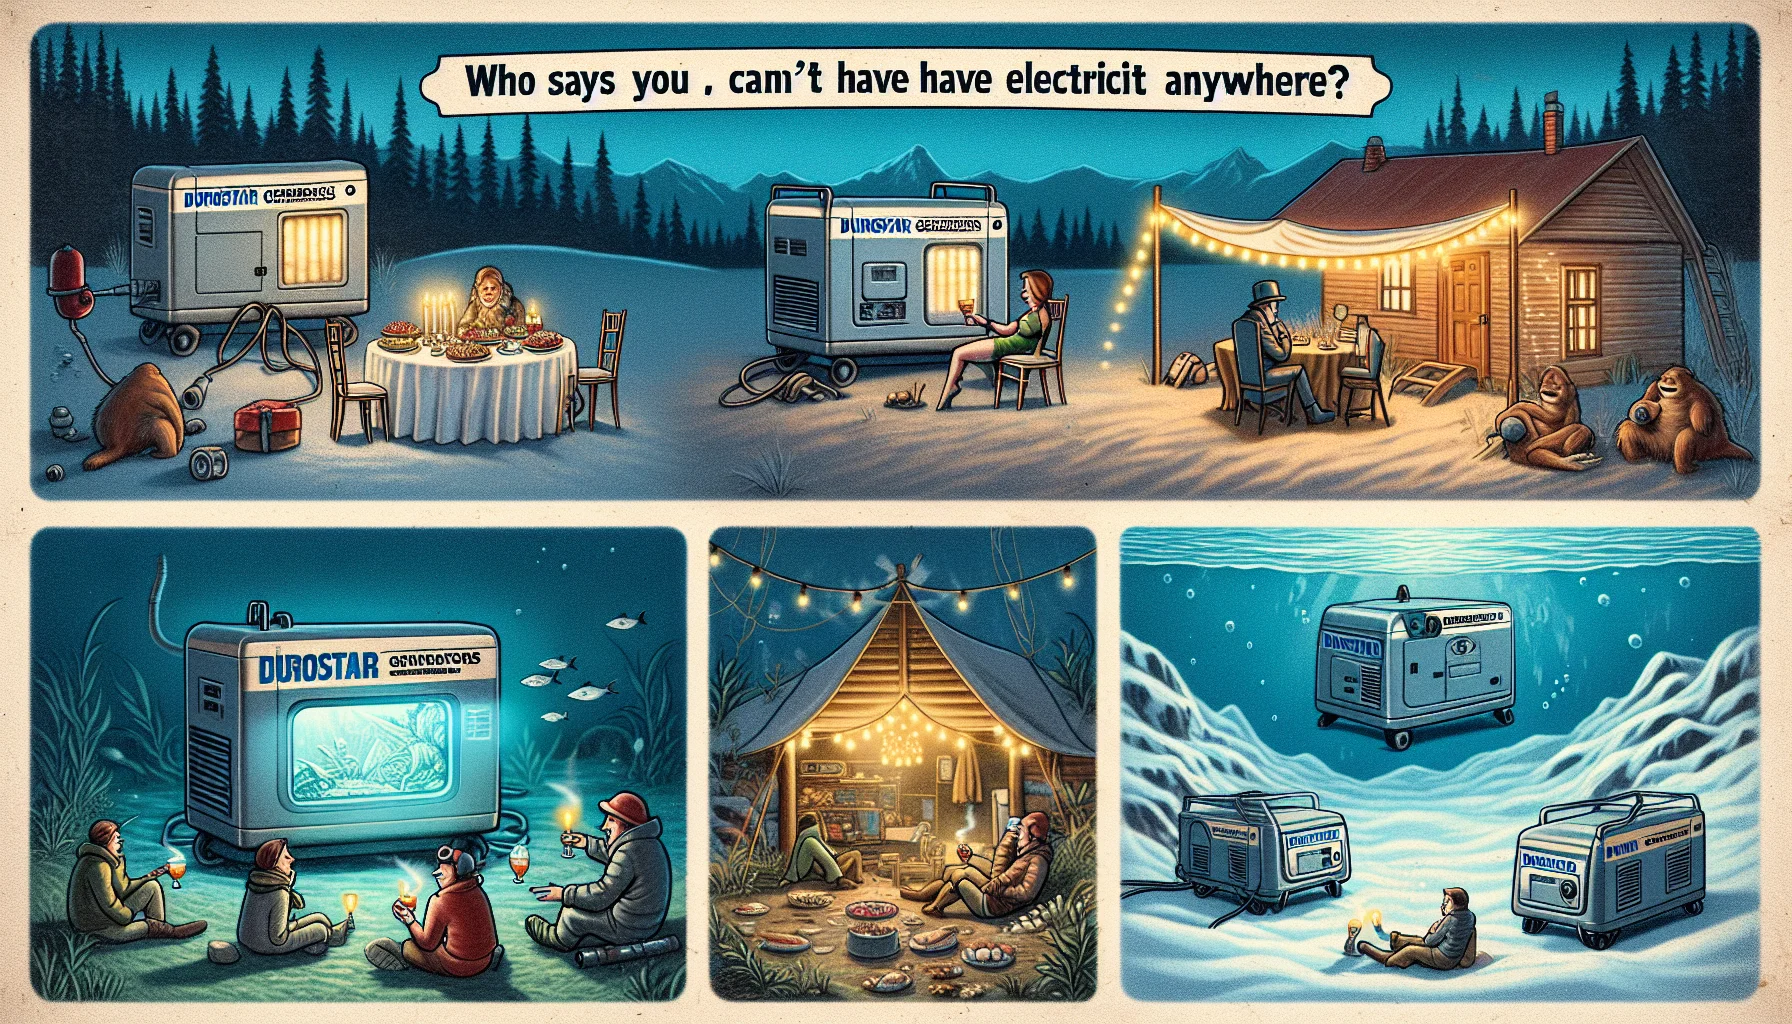 Illustrate a humorous scene where an array of Durostar generators are situated in unexpected environments. Show one generator powering a fancy dinner party outdoors in the wilderness, another illuminating an underwater explorer's cabin, and a third one powering a pop-up movie night at the top of a snow-covered mountain. The vintage-style caption should read, 'Who says you can't have electricity anywhere?'